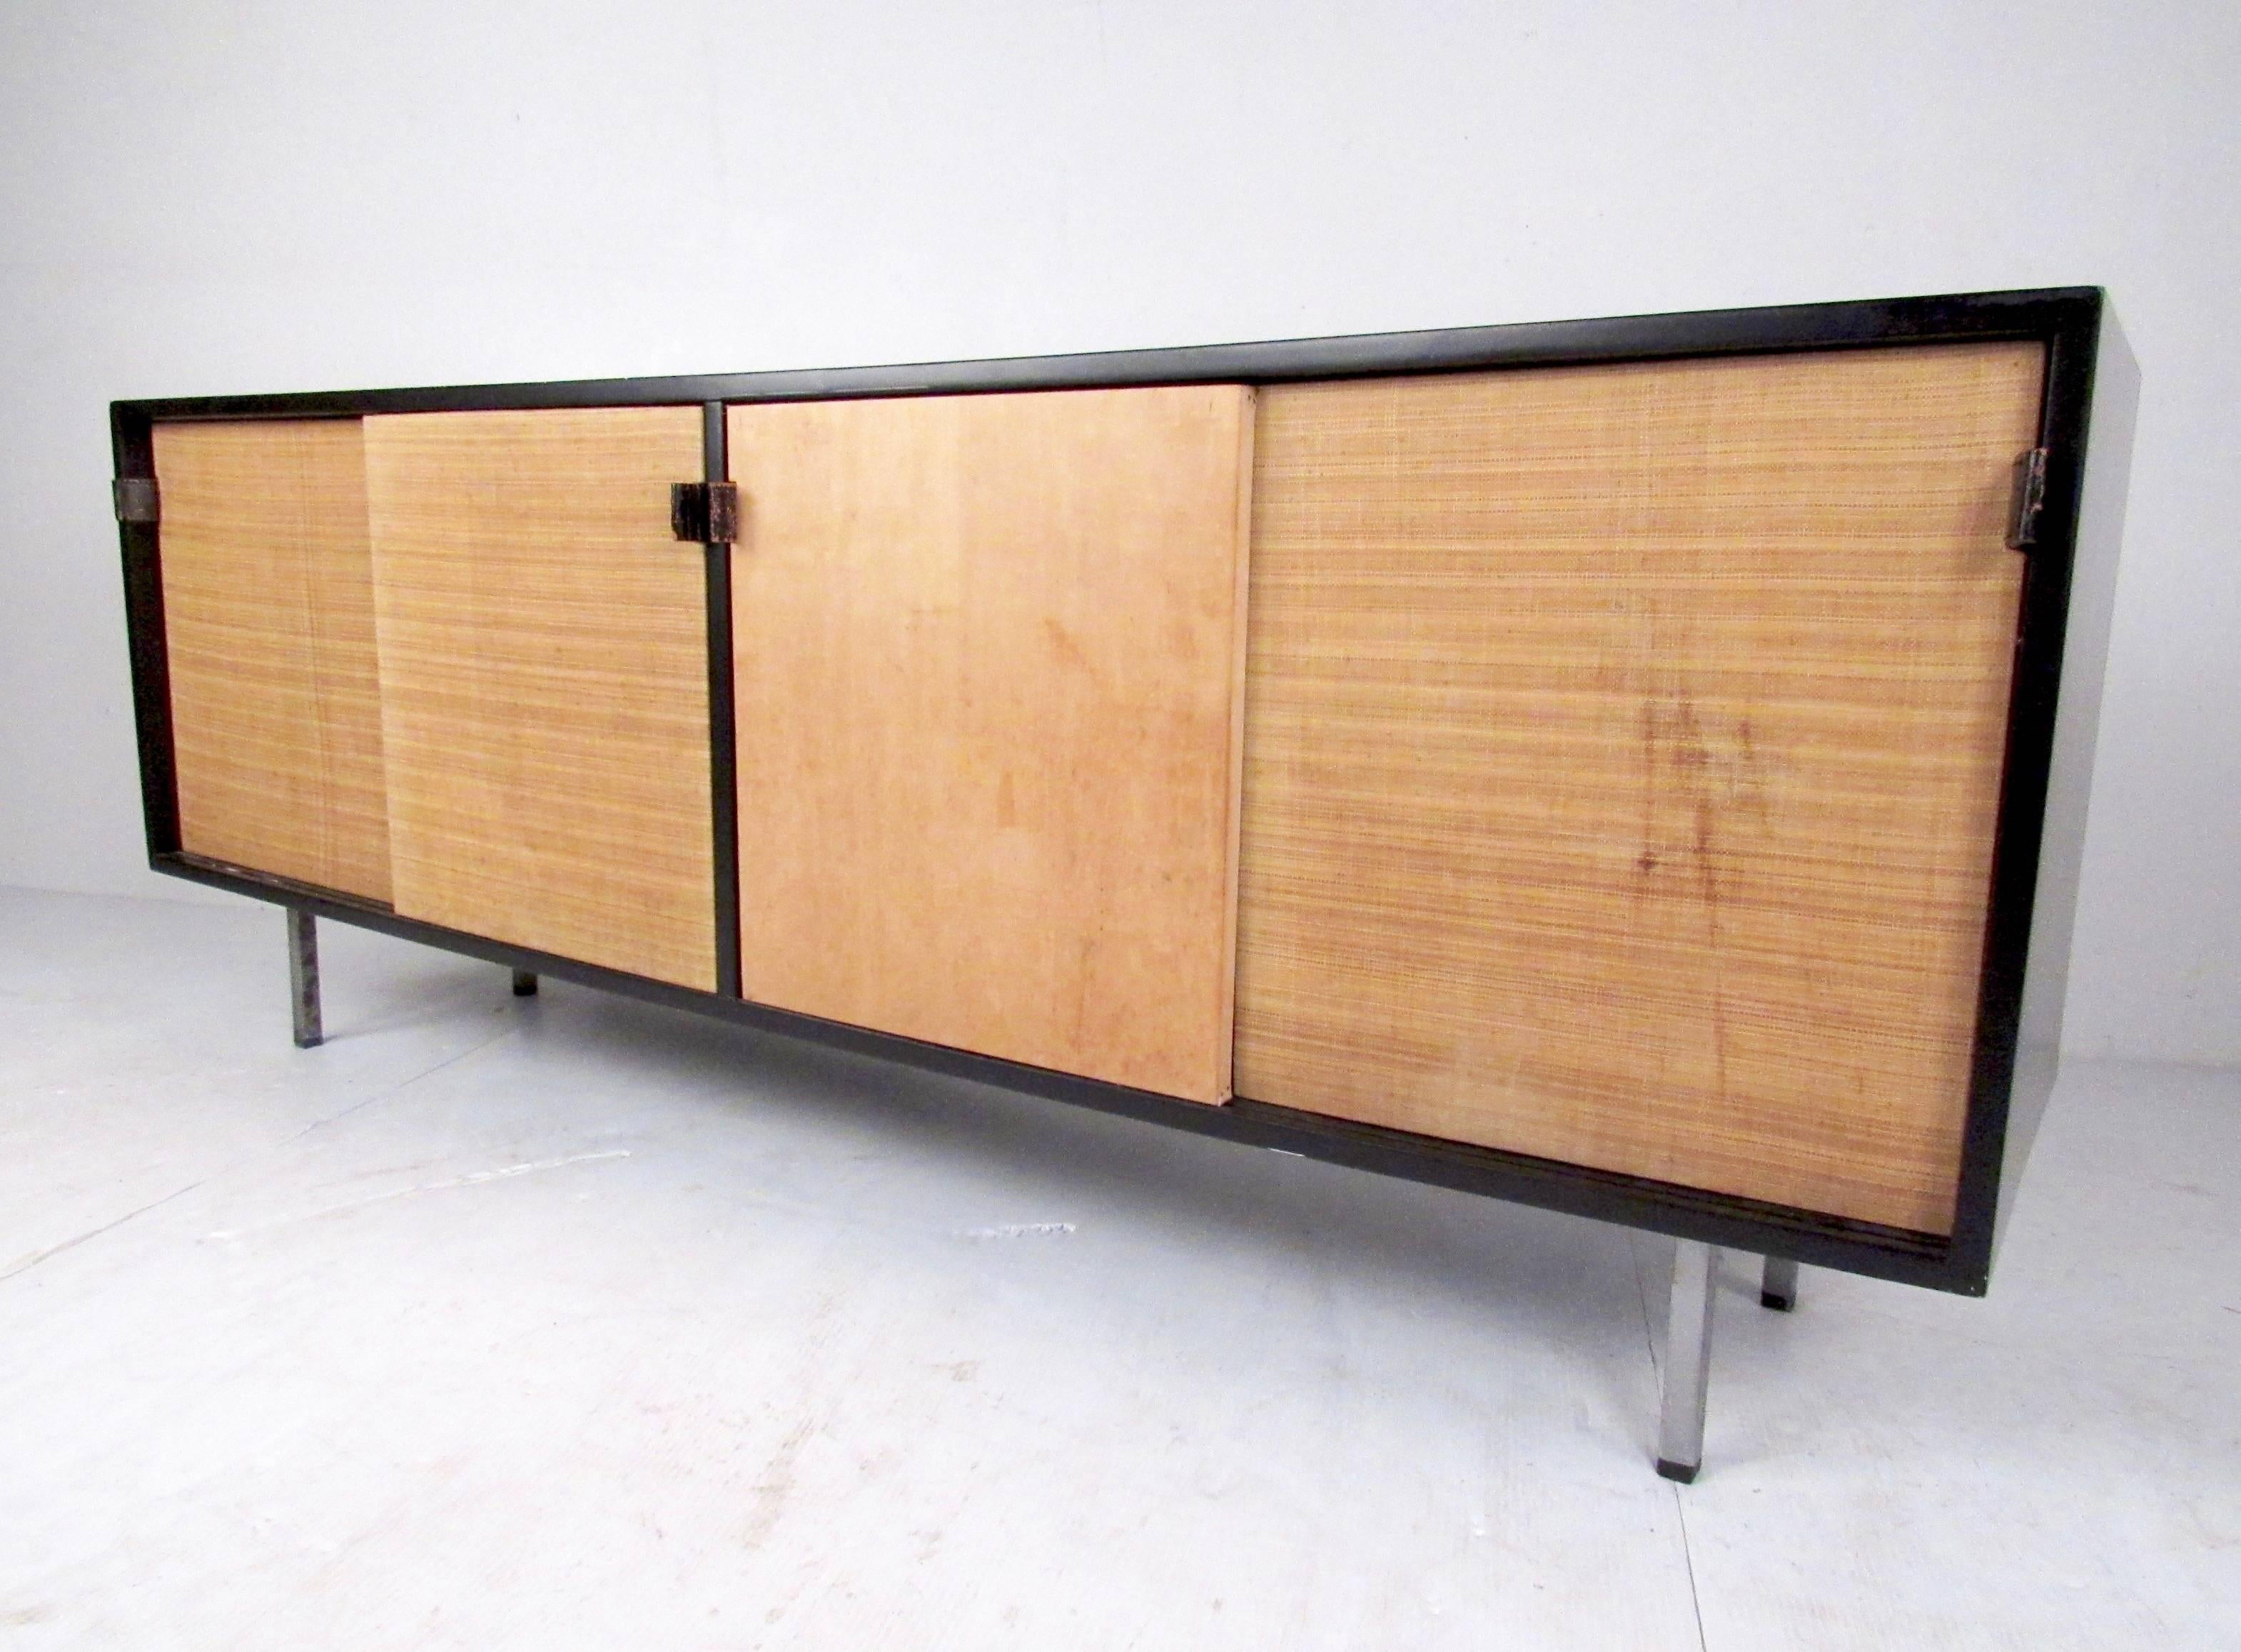 This stylish midcentury Florence Knoll credenza features cane front panels, leather door pulls, chrome legs, and quality Knoll construction. The lacquered finish contrasts wonderfully with the light colored cane doors while interior storage includes